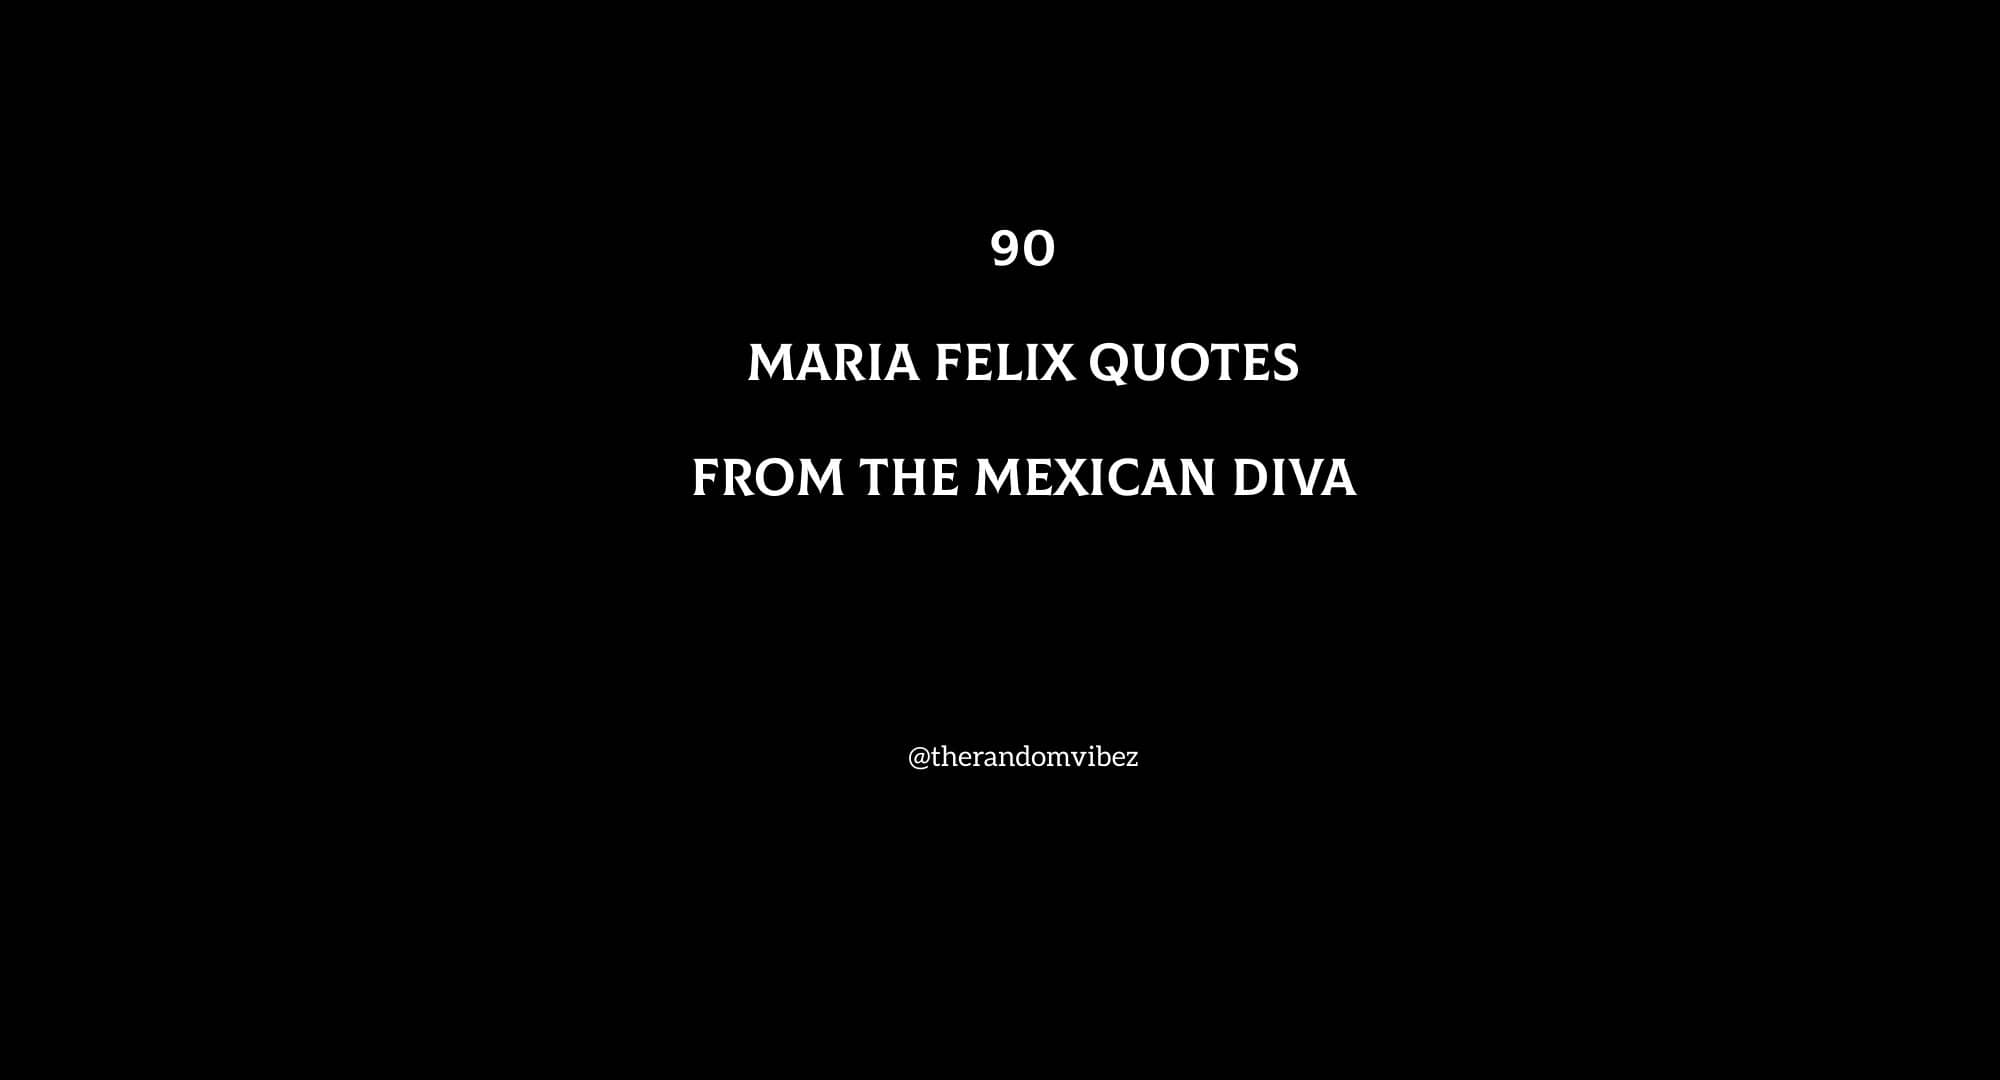 Top 90 Maria Felix Quotes From The Mexican Diva